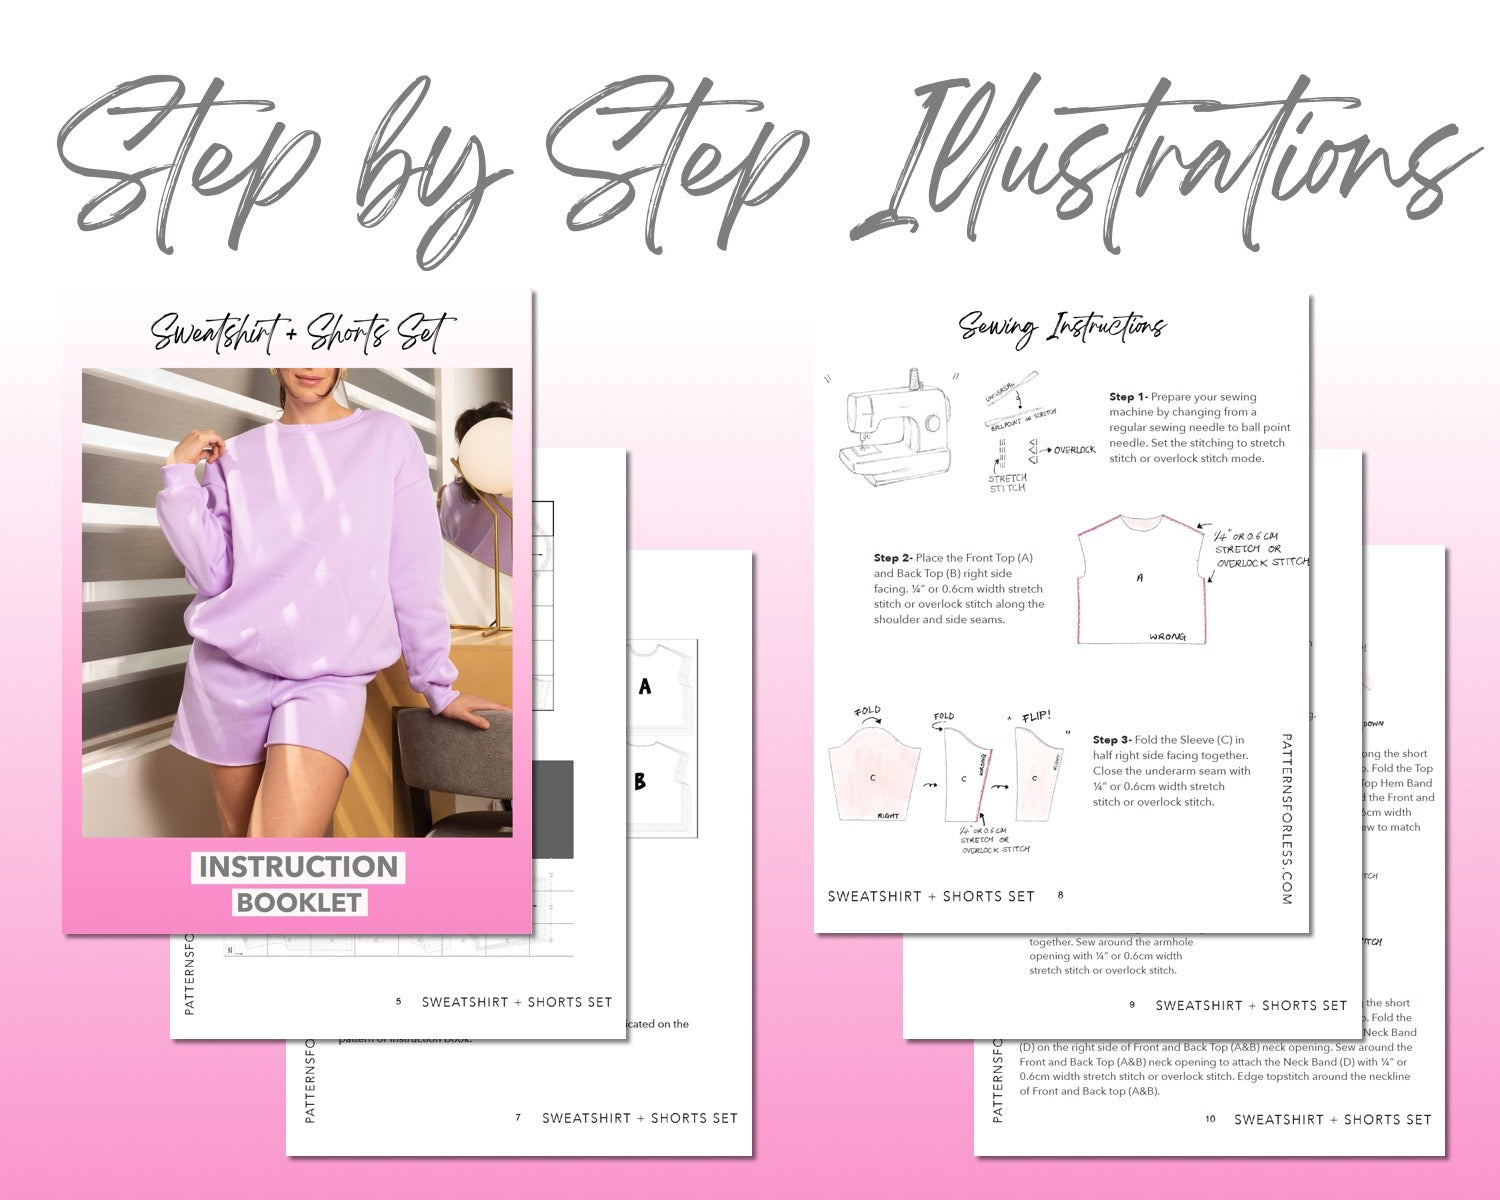 Sweatshirt and Shorts Set sewing pattern step by step illustrations.